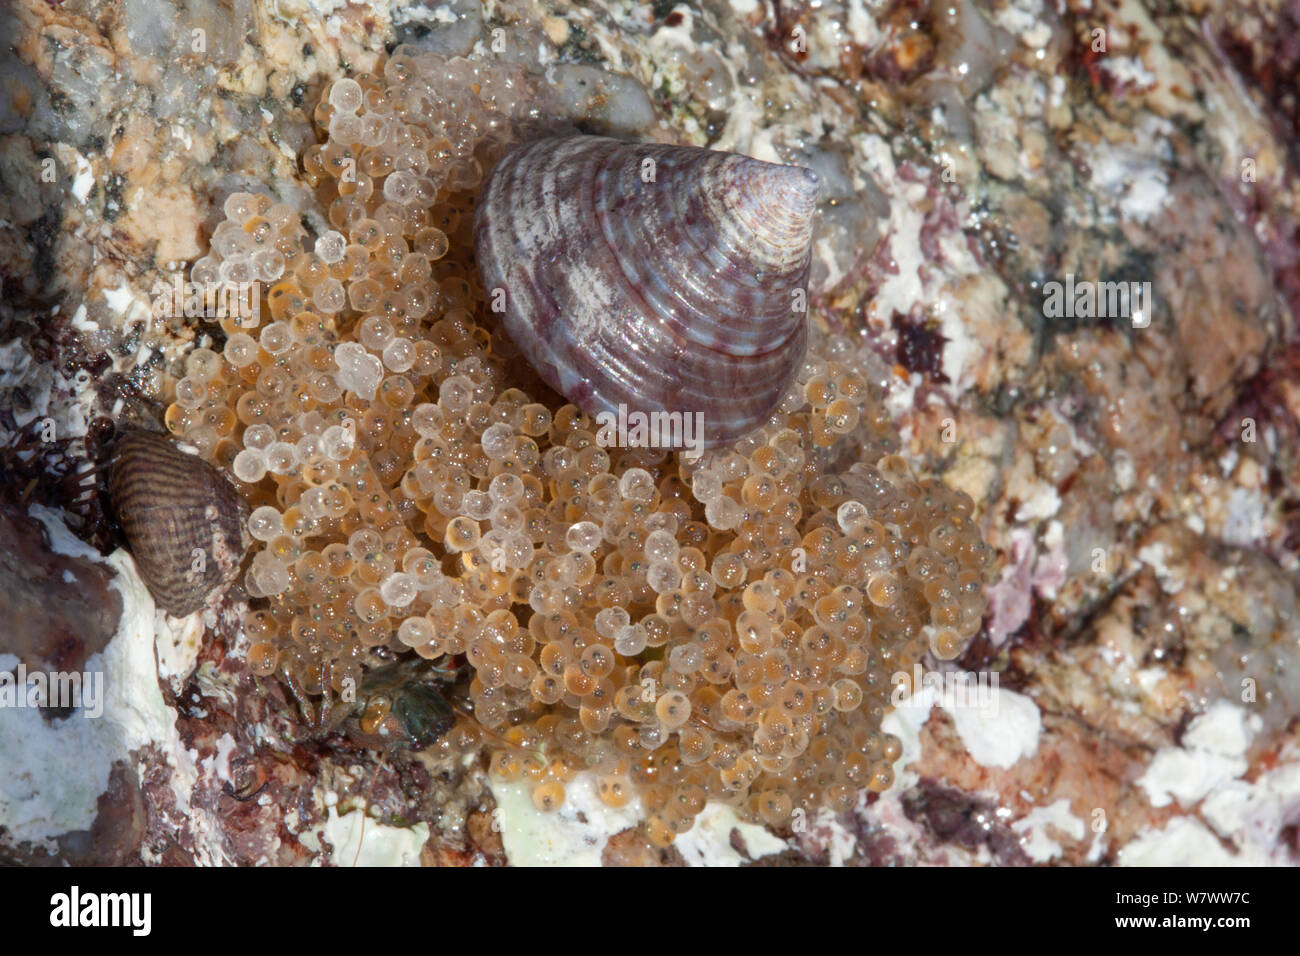 Eggs of Long-spined sea scorpion (Taurulus bubalis) on sea shore, possibly being predated by Painted Topshell, Guernsey, British Channel Islands Stock Photo